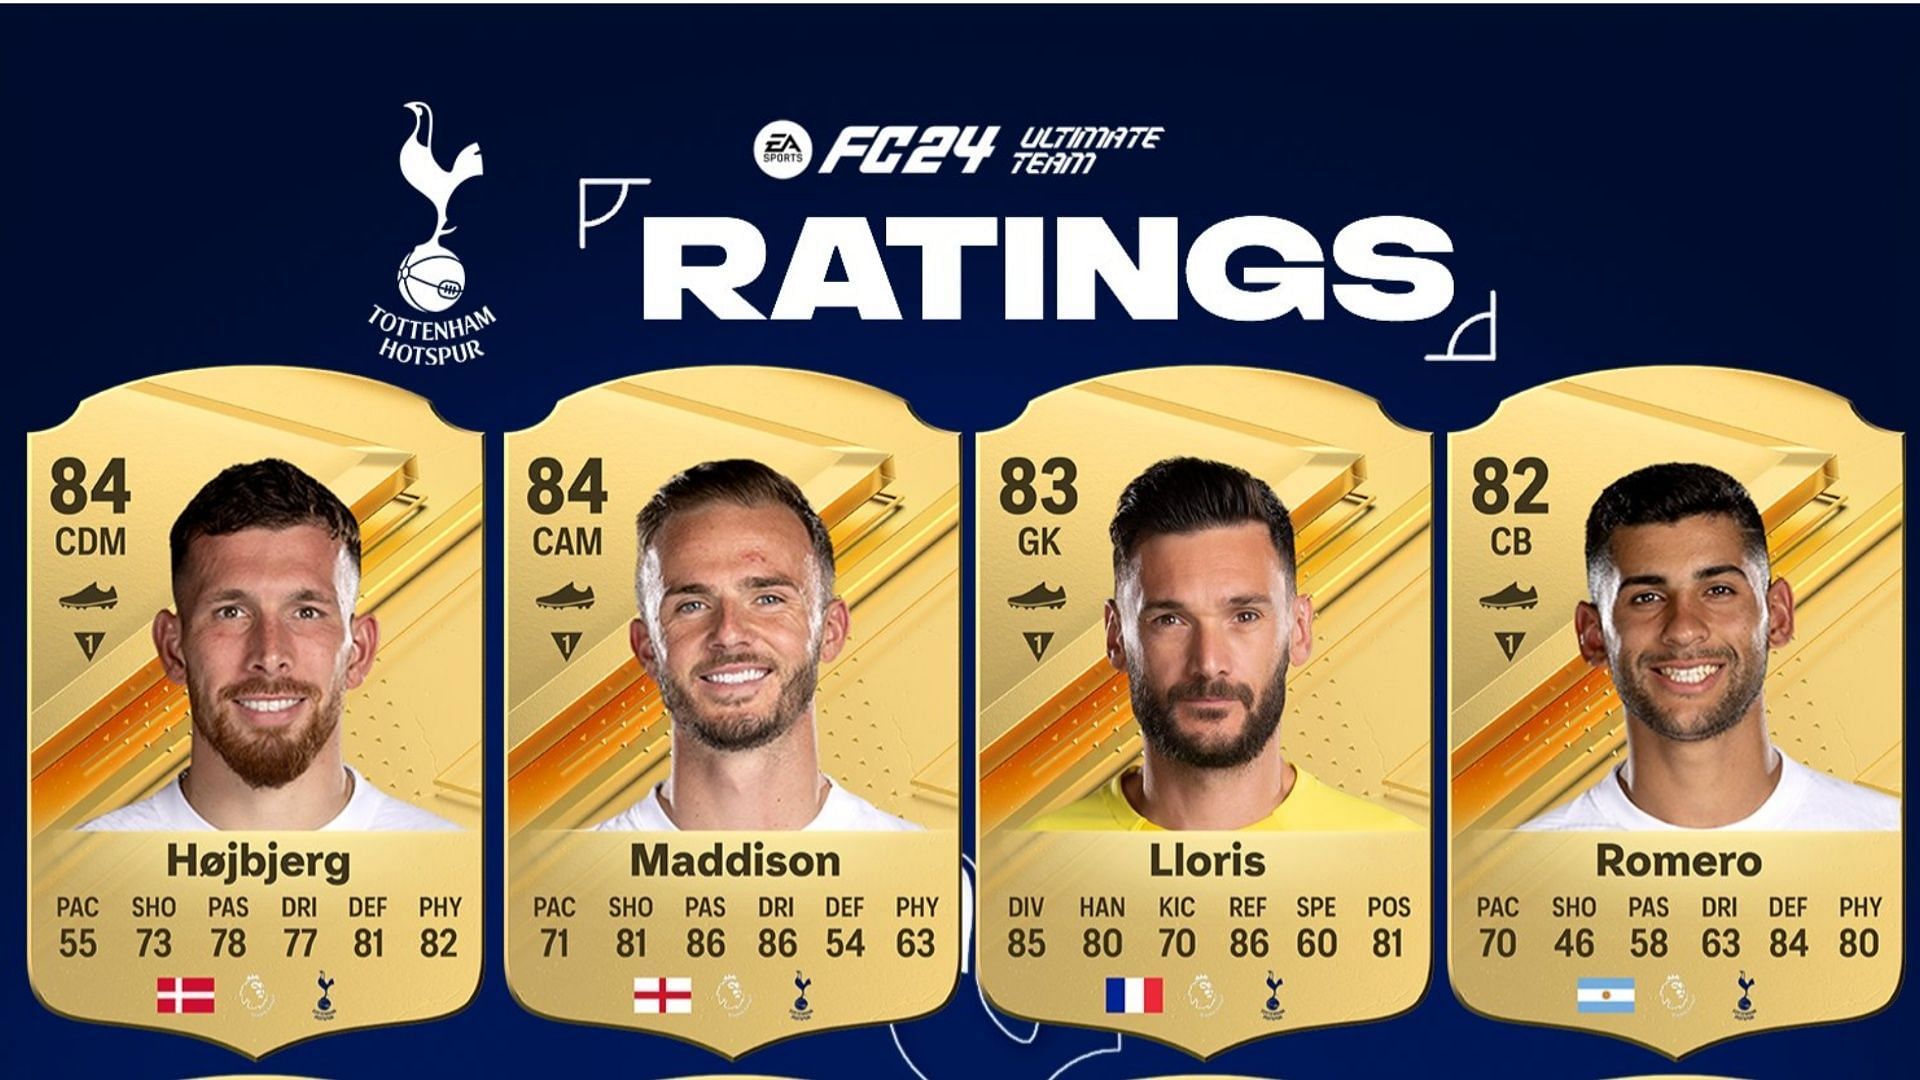 Tottenham's EA FC 24 player ratings revealed with huge Son Heung-min update  